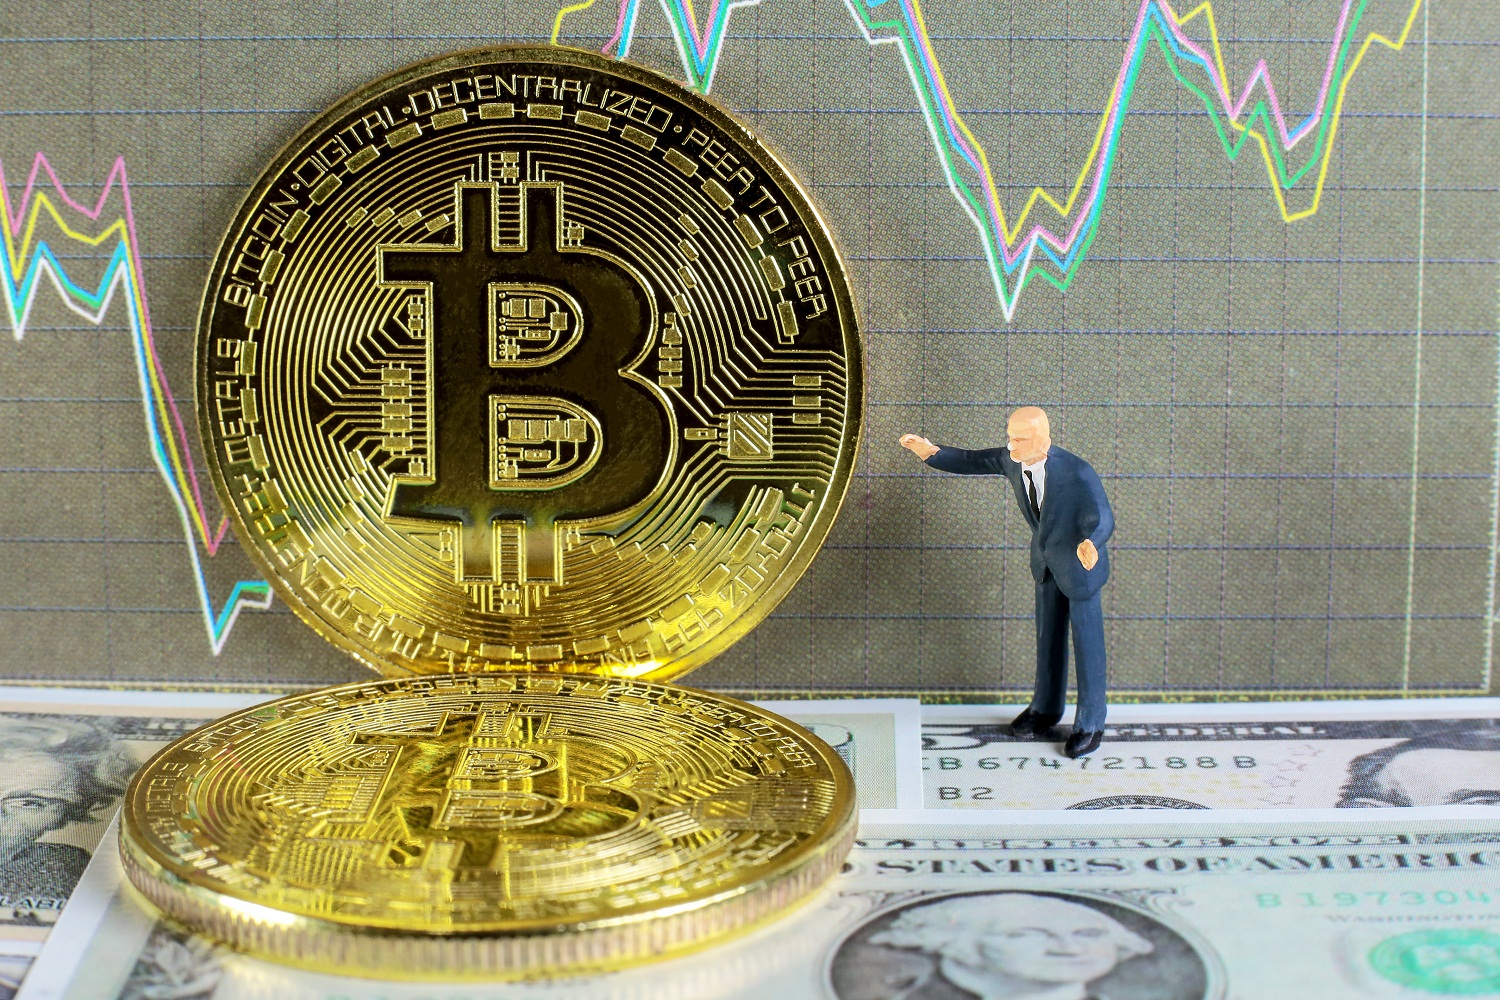 Bitcoin Bounces Back To $8K From Historically Strong Price Support